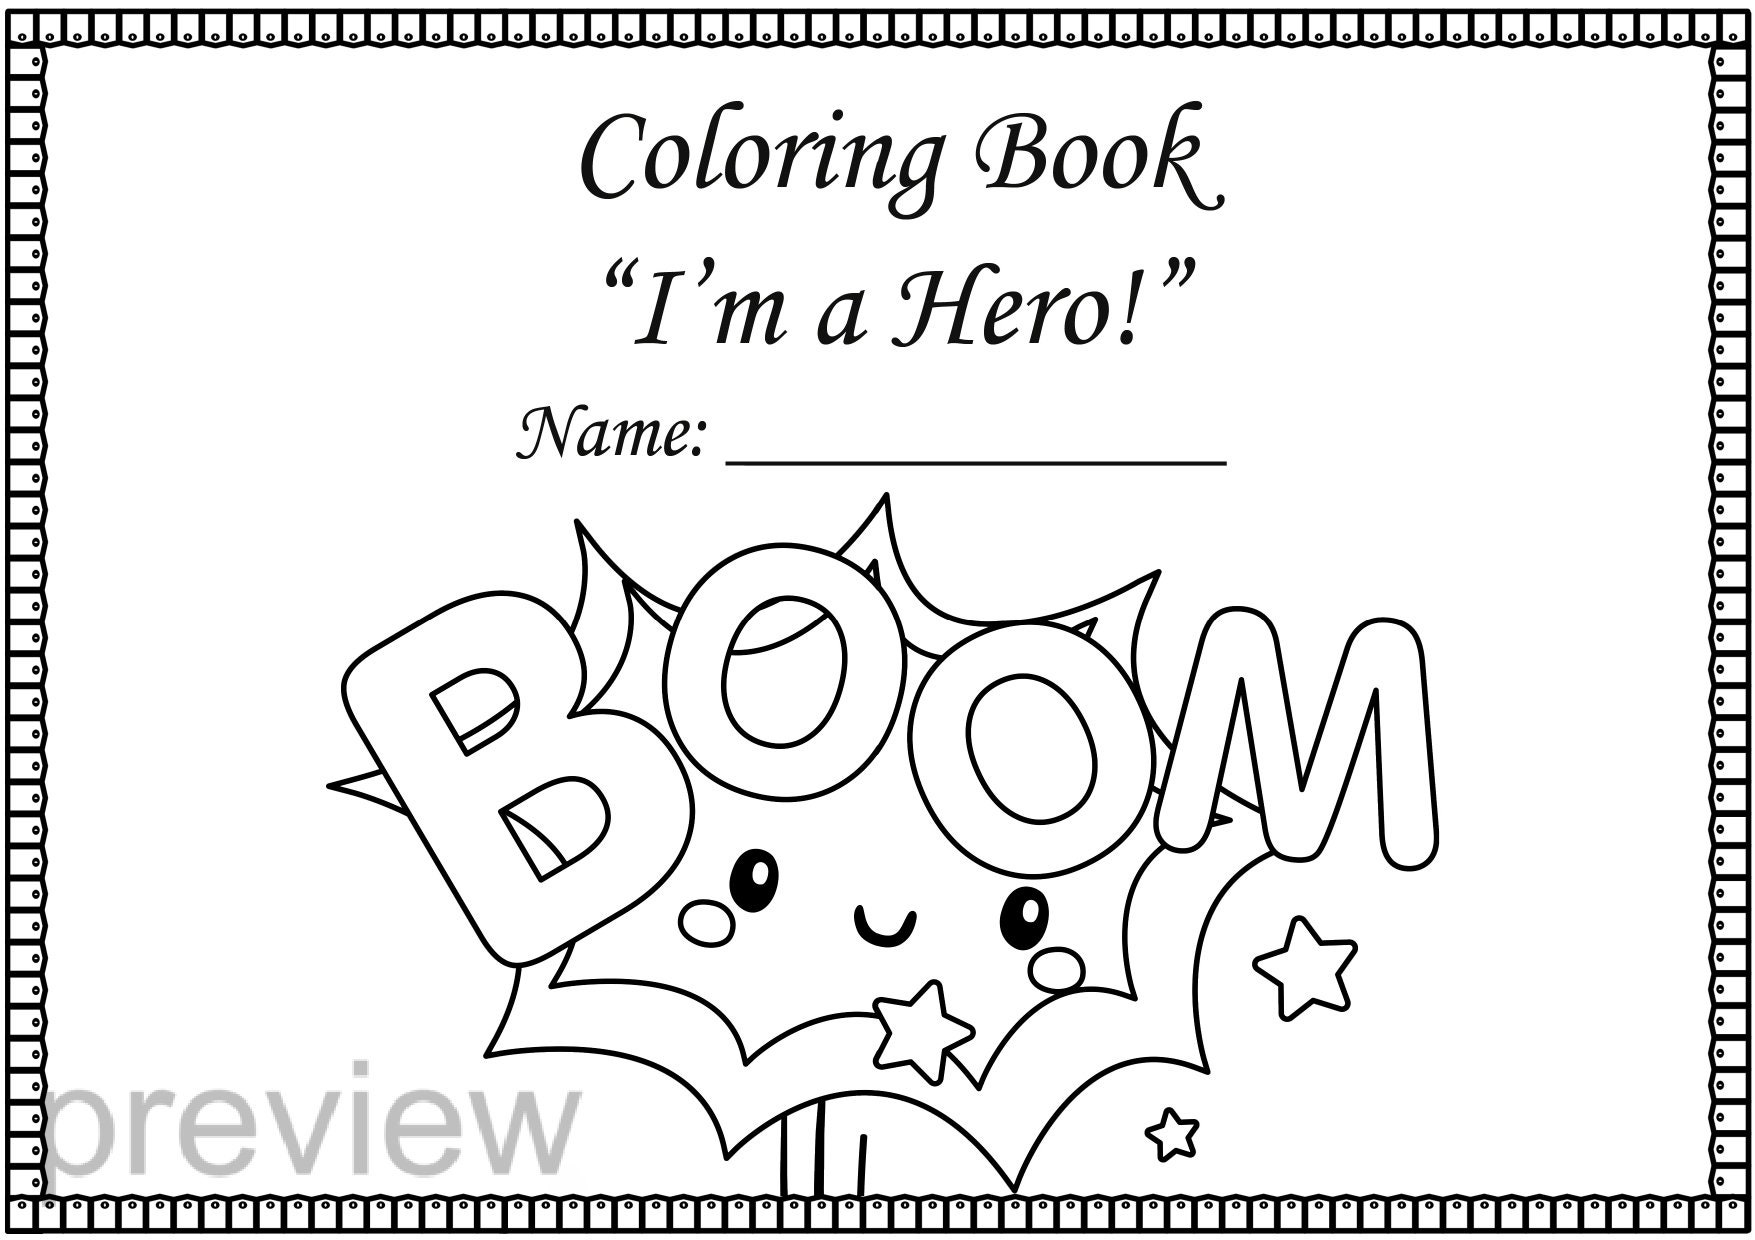 Coloring Book for 7+ Year Olds (Superhero Words) [Book]